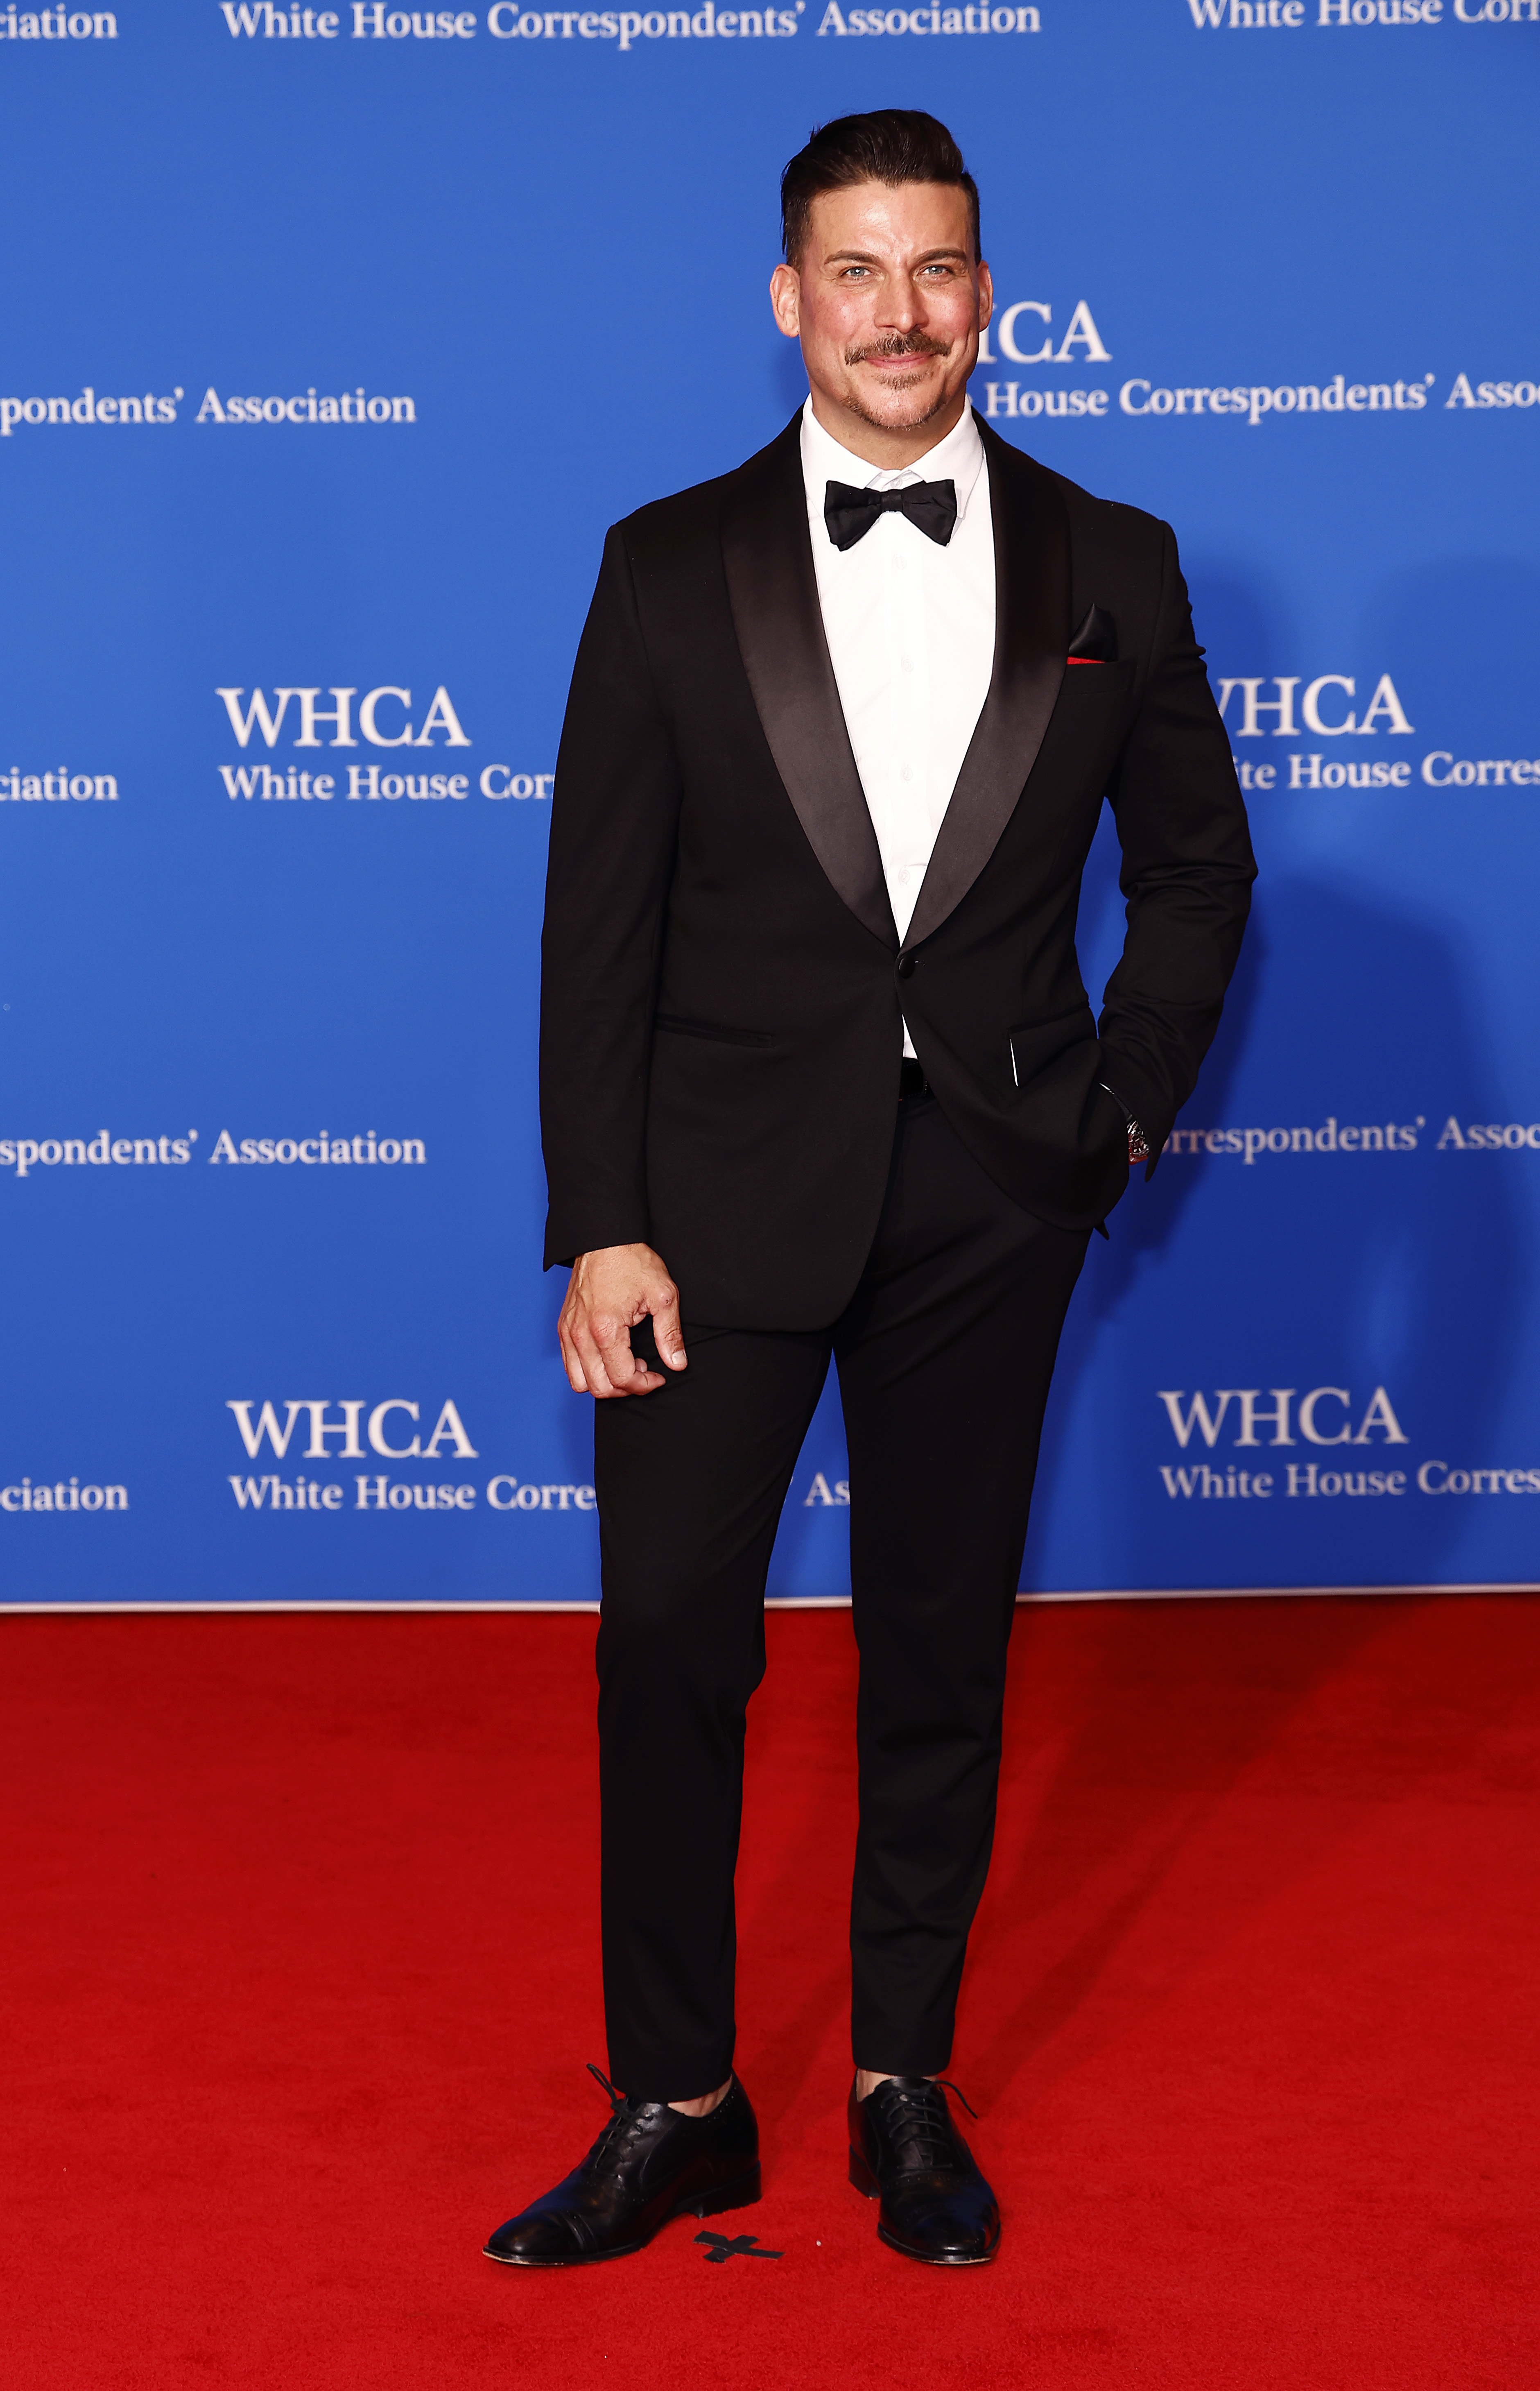 Jax Taylor in a black suit posing on the red carpet at the White House Correspondents Dinner 